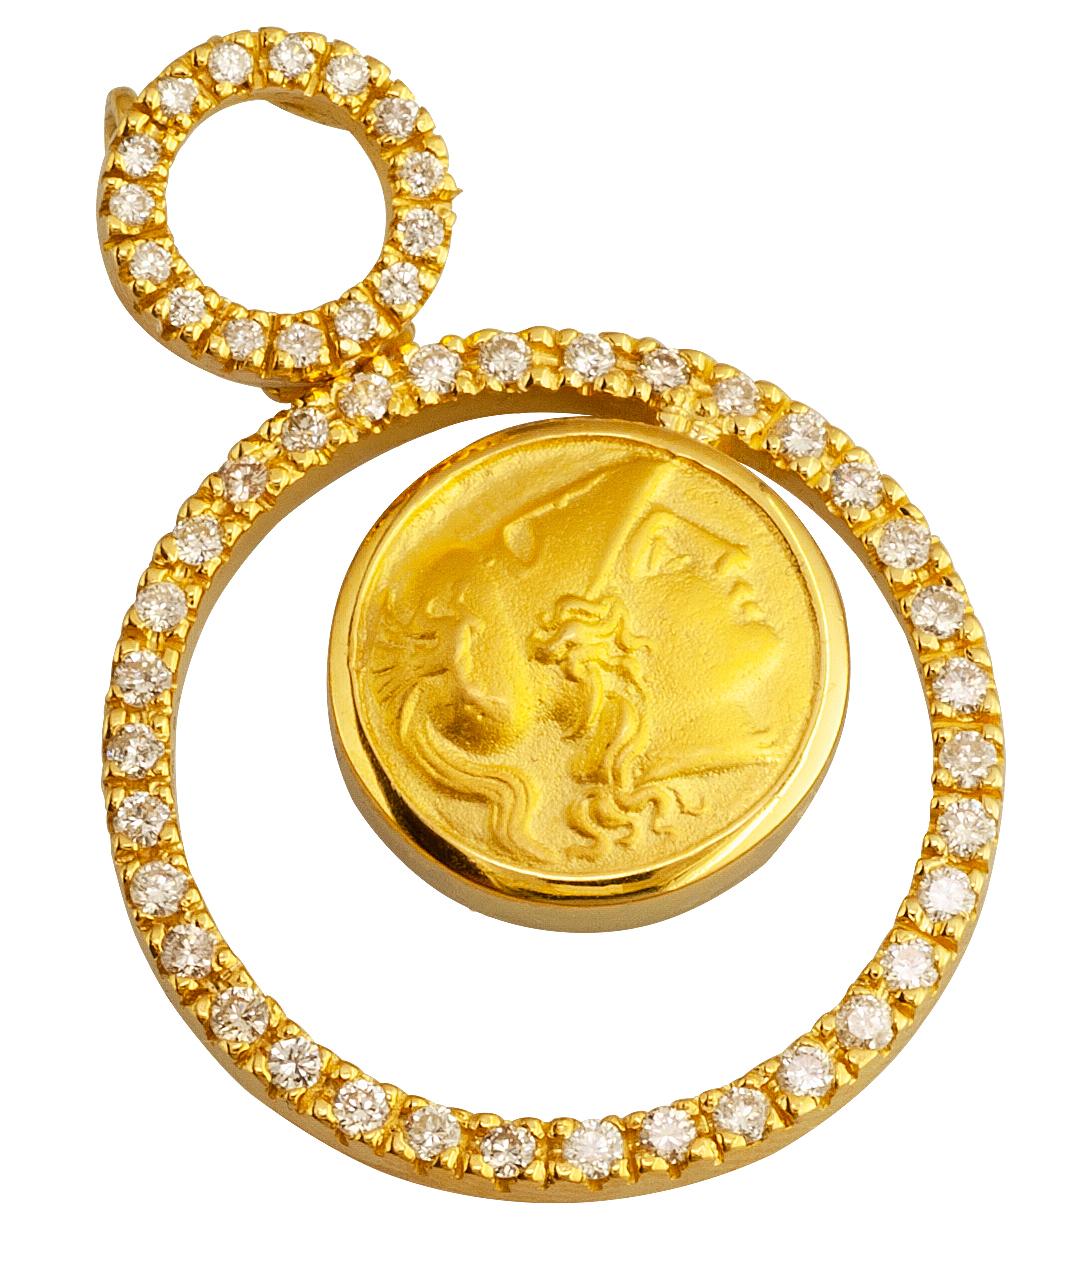 This S.Georgios designer 18 Karat Gold Diamond Athena Coin Pendant Necklace is all hand made. It features two bezels with Brilliant Cut White Diamonds total weight of 0.84 Carat in a unique design. The coin is a replica from the original Athena coin